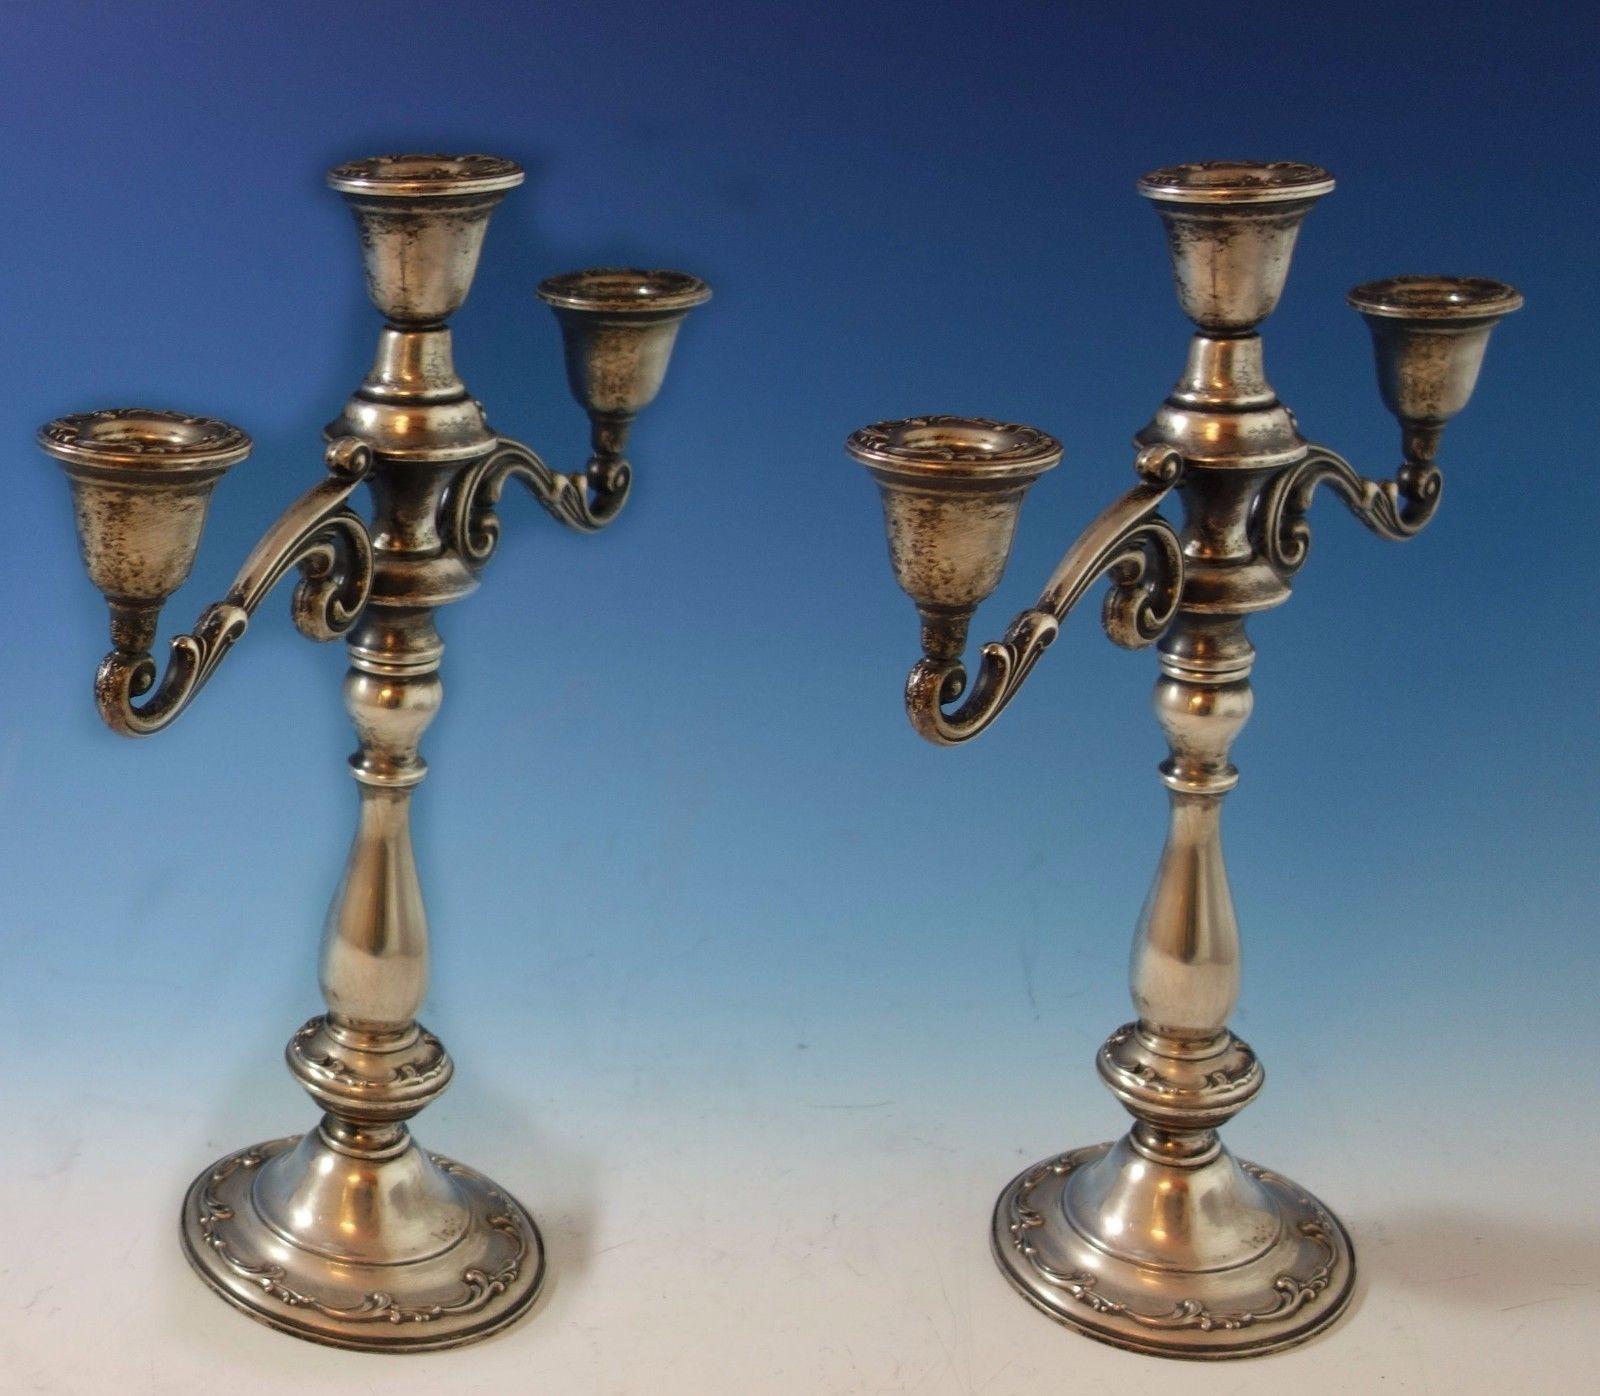 Angelique by International sterling silver pair of candelabras (weighted). The candelabras are 3-light and are marked with #127/65. The pair measures 13 1/2 tall and 12 wide. They are not monogrammed and are in excellent condition. Impressive.